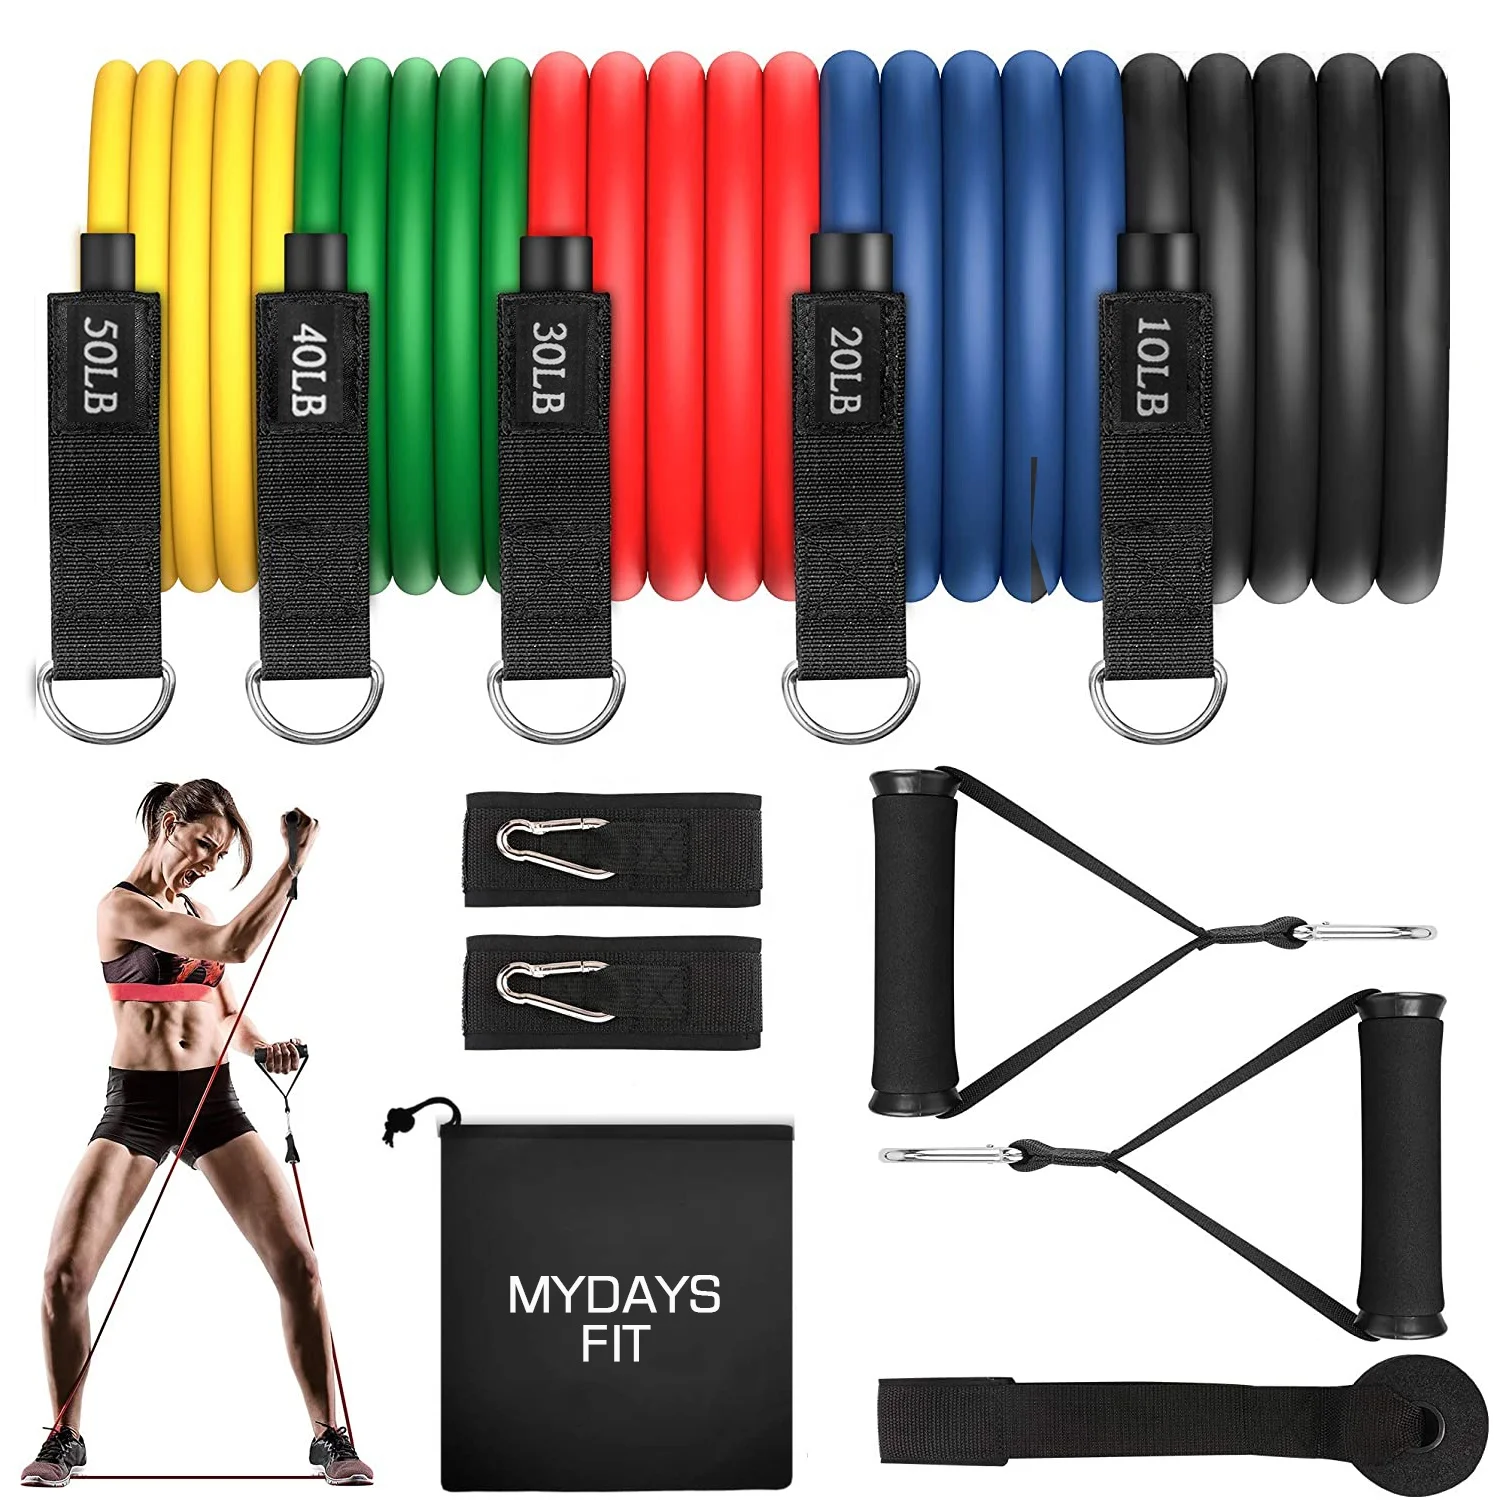 

Fitness Yoga Home Gym Equipment Workout Stackable Up to 150lb 11pcs Exercise Resistance Tubes Bands Set with Door Anchor Handles, Green blue red black